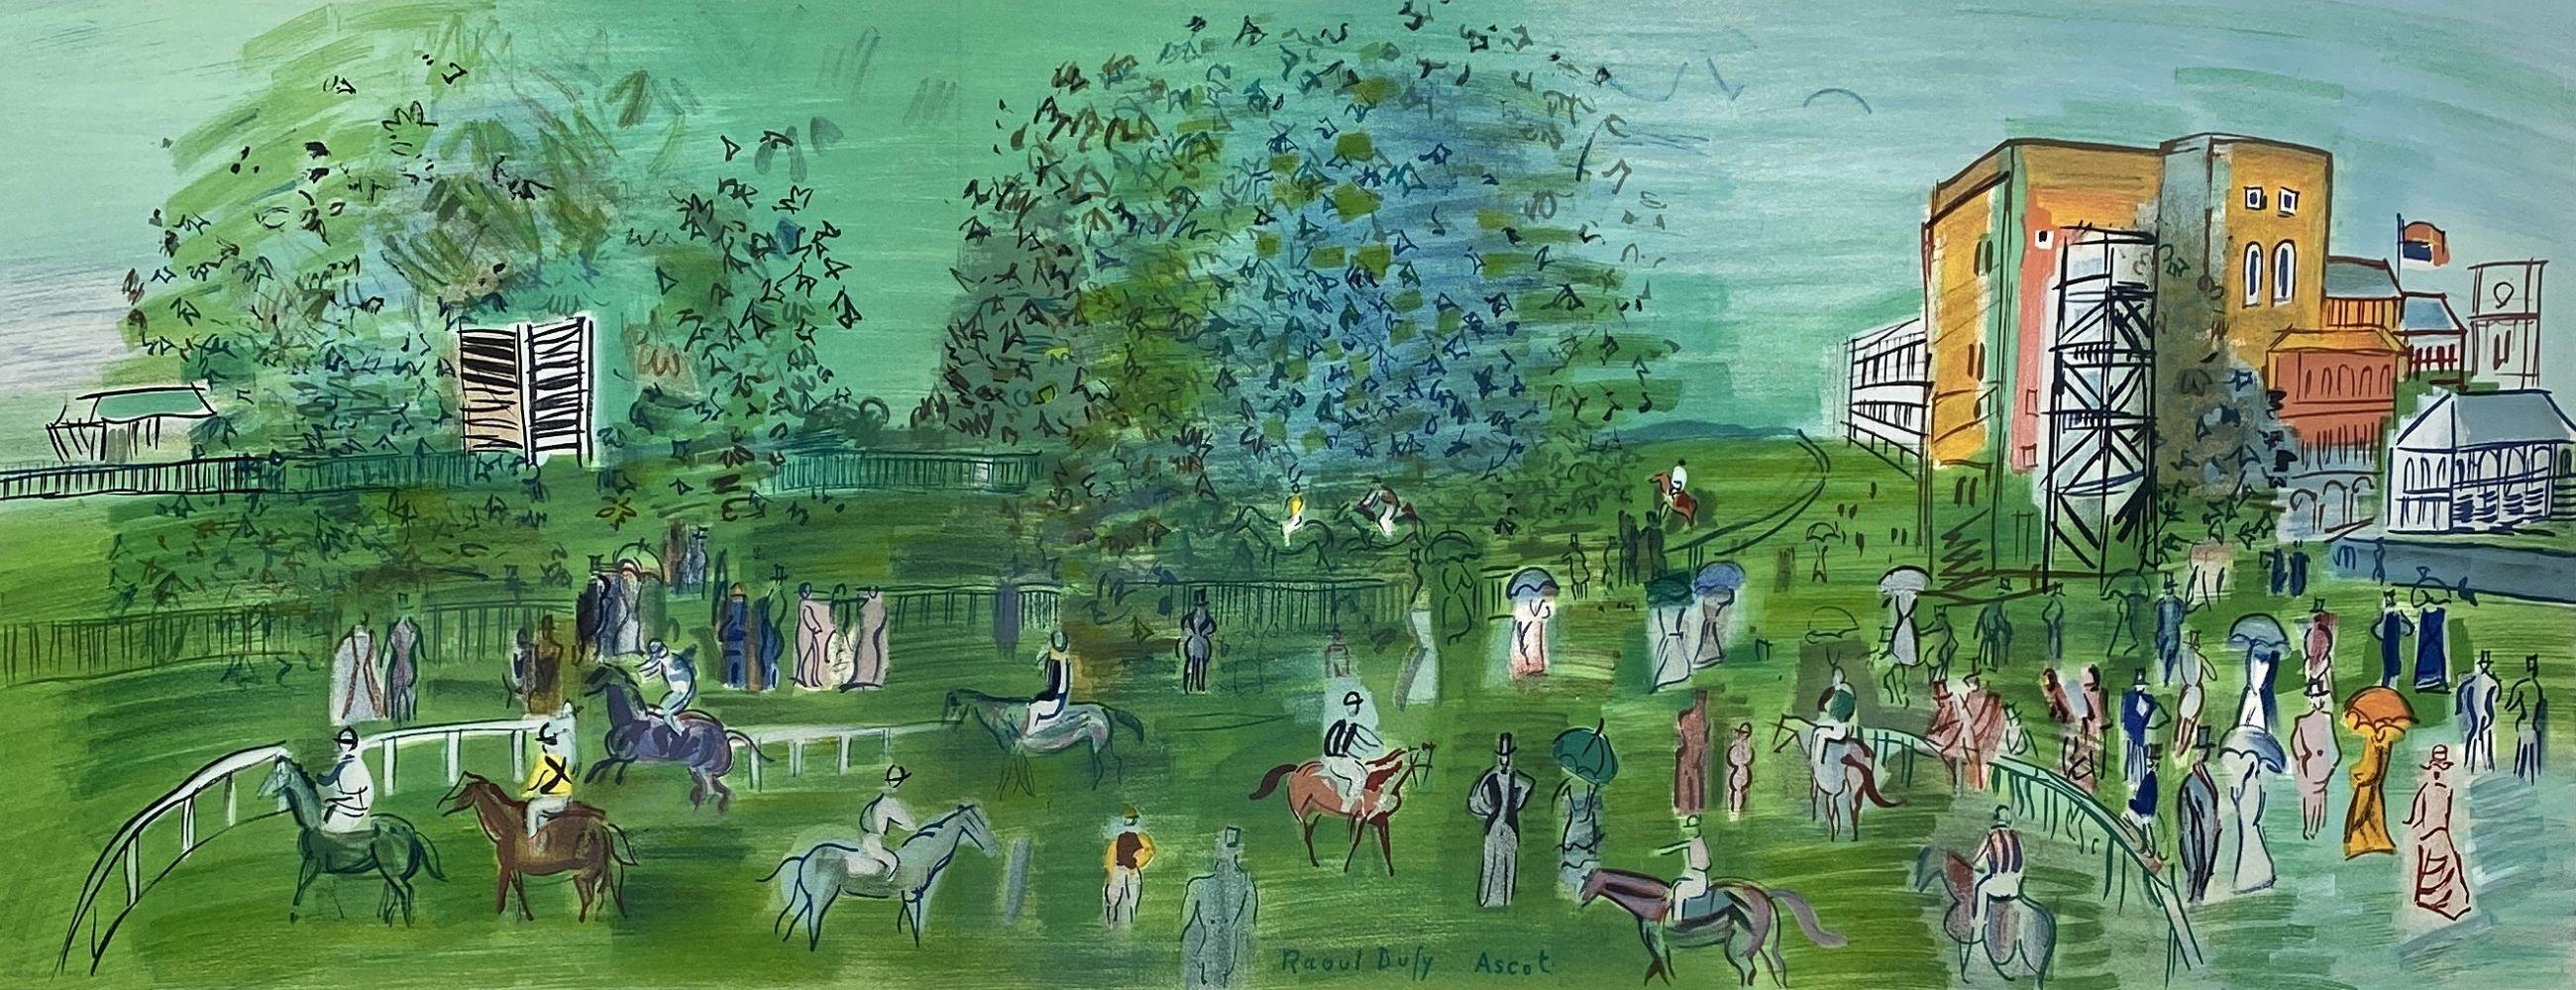 Hippodrome Ascot Racecourse - Tall Lithograph Signed in the Plate (Mourlot) - Print by Raoul Dufy